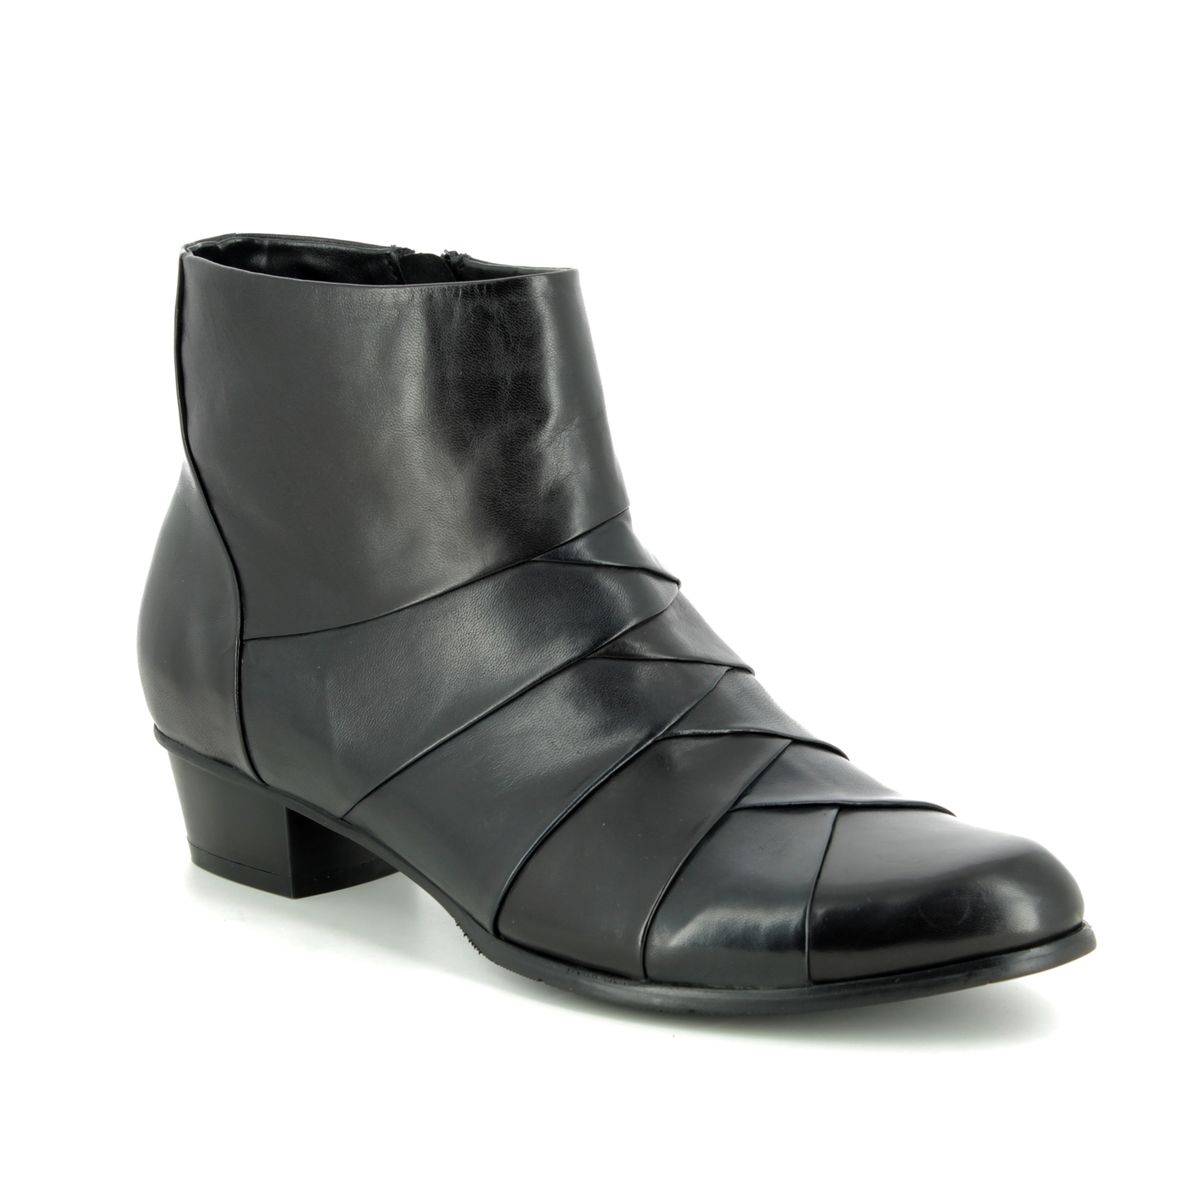 Regarde Le Ciel Stefany 172 Black Navy Womens Boots 9118-30 Ankle Boots In Soft Black Navy Leather In Size 36